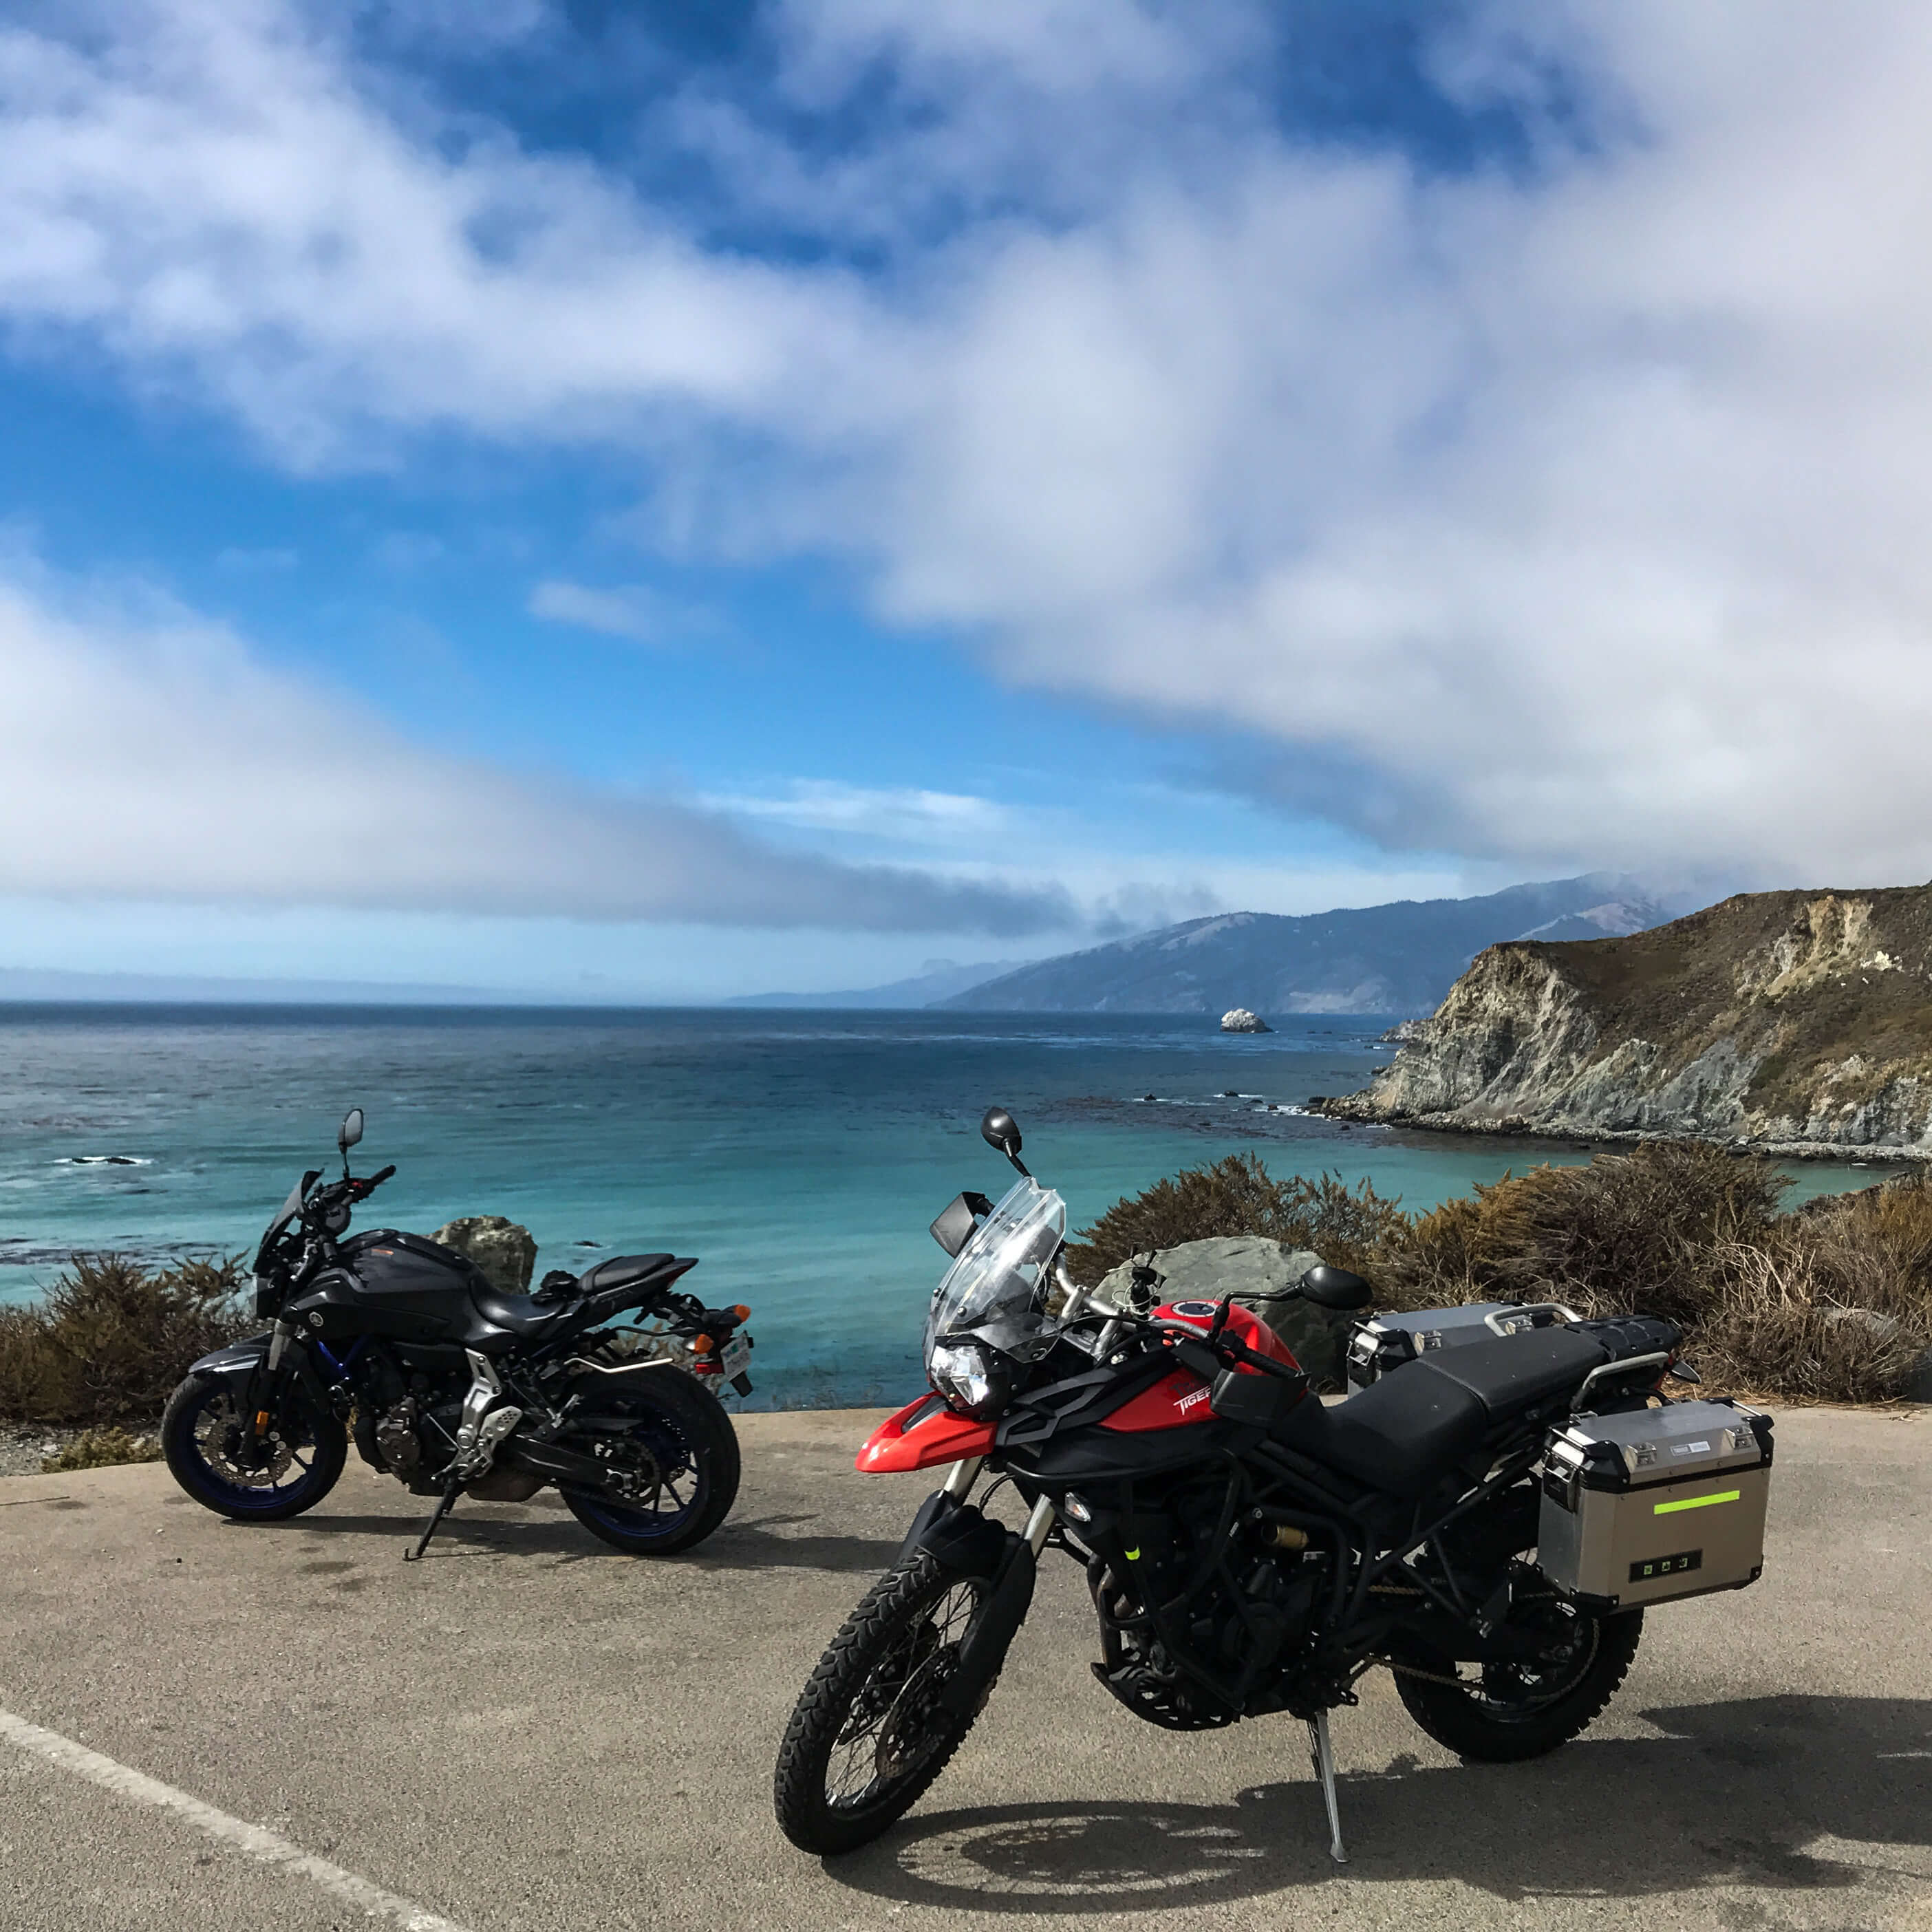 5-Day 'Highway 1 ride to the Quail Motorcycle Gathering' (2022)